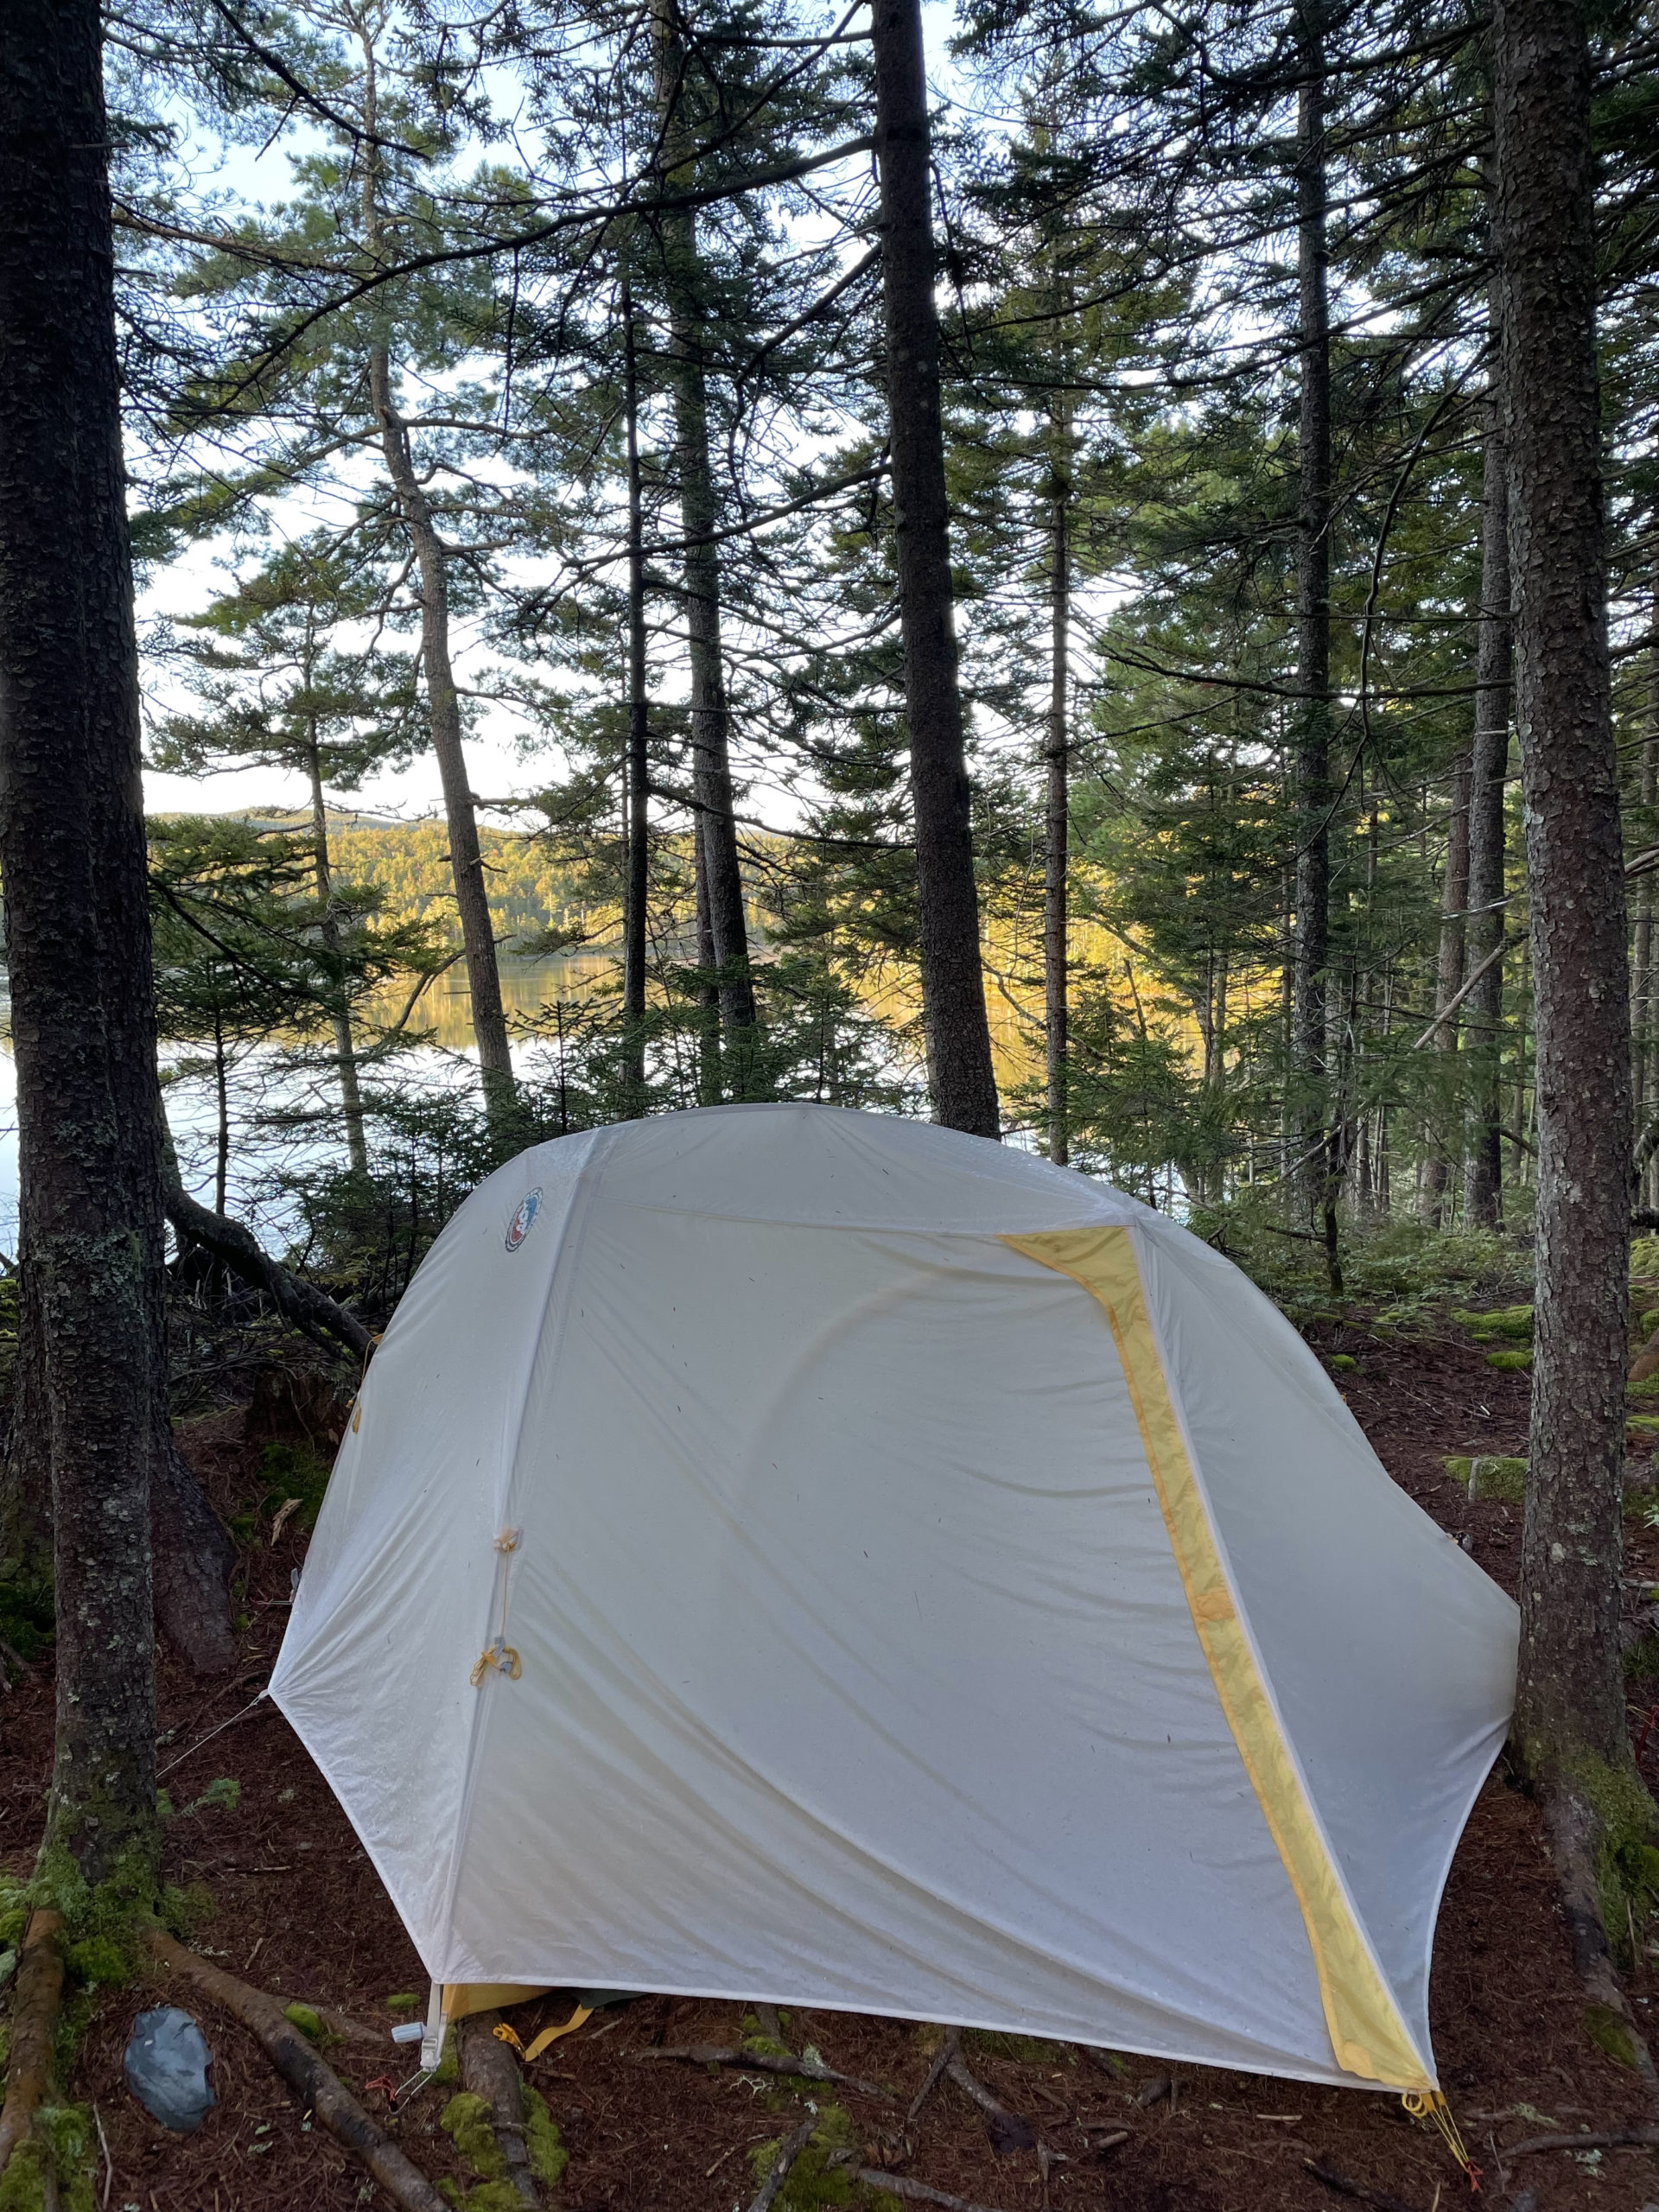 Camping by East Chairback Pond, day 3, 100 Mile Wilderness, Maine Appalachian Trail